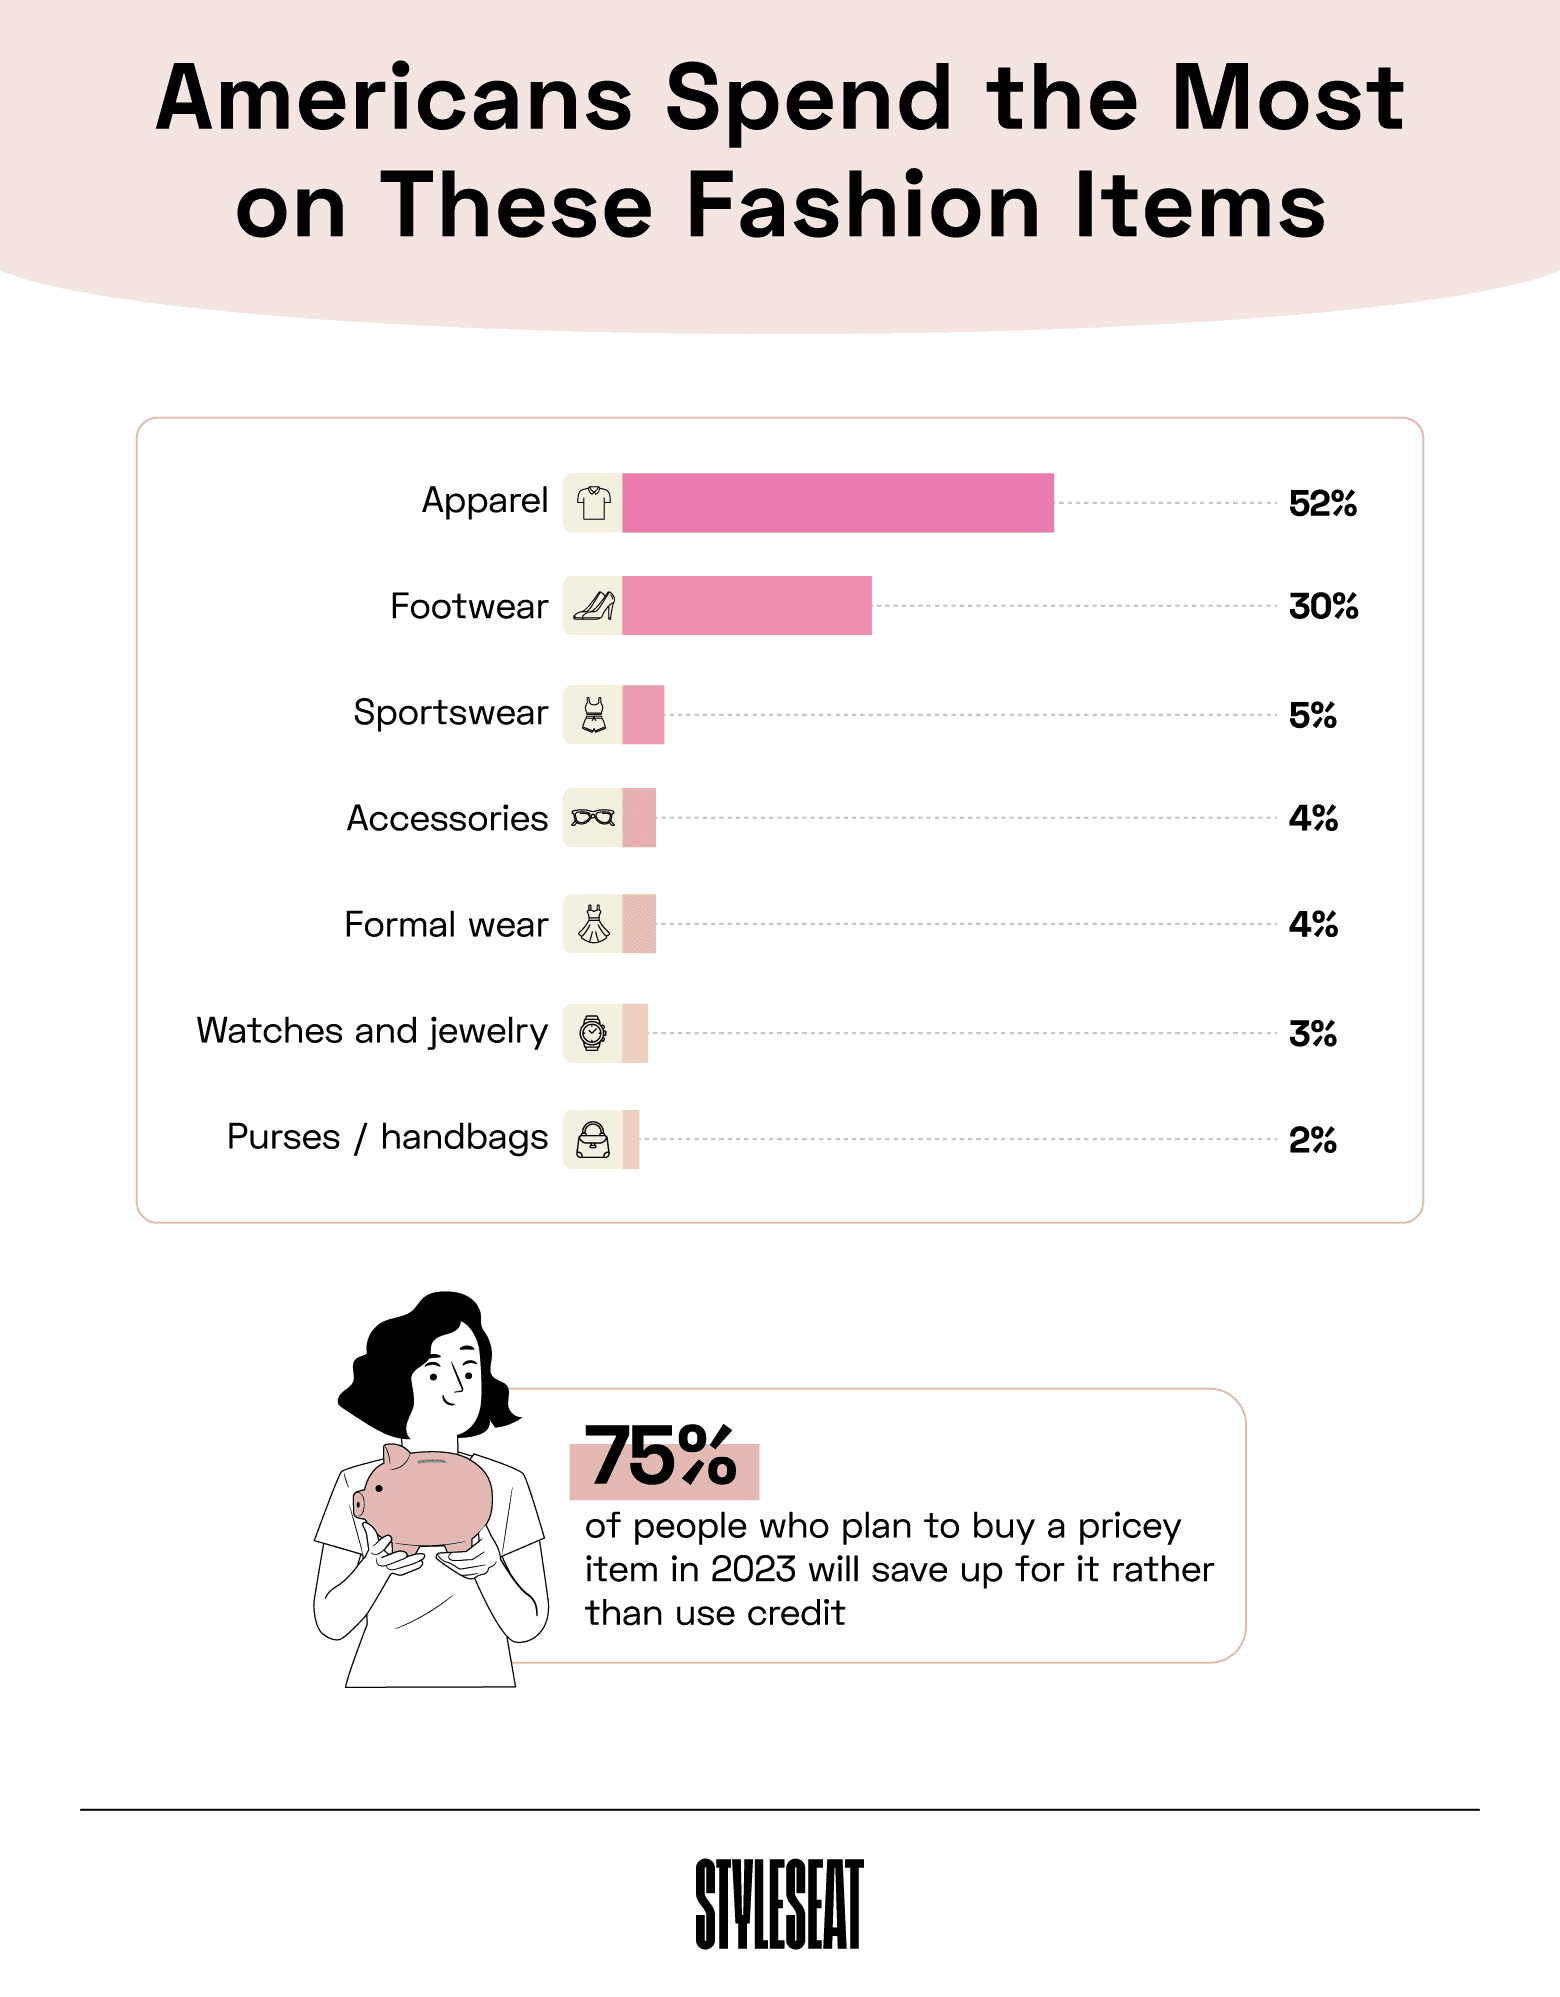 a ranking of the fashion items people spend most on